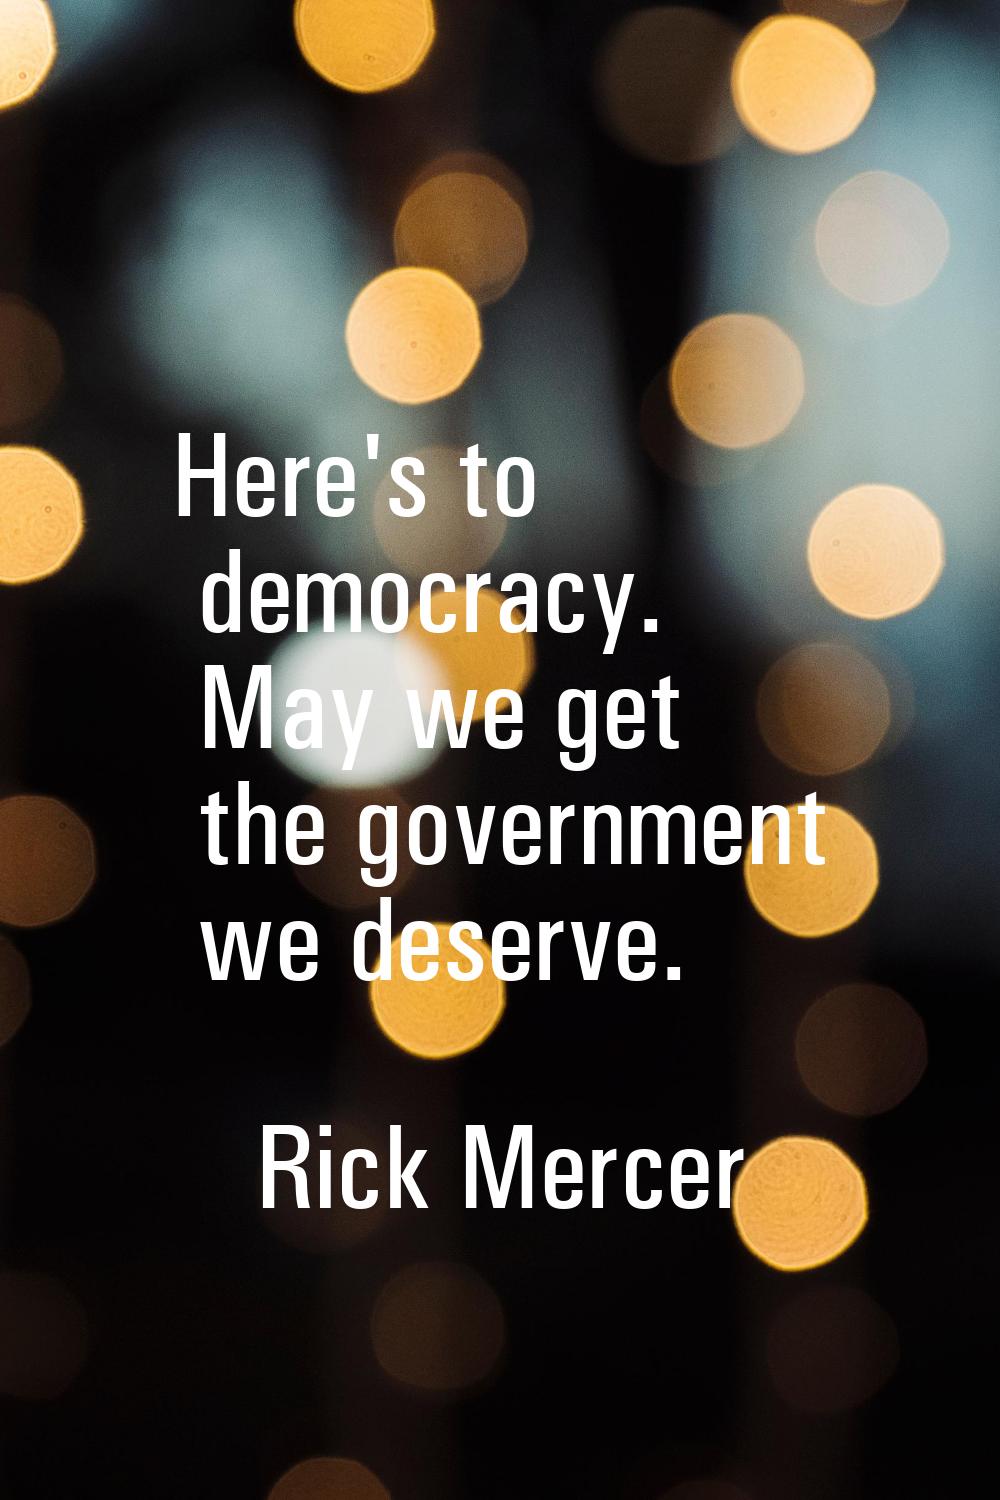 Here's to democracy. May we get the government we deserve.